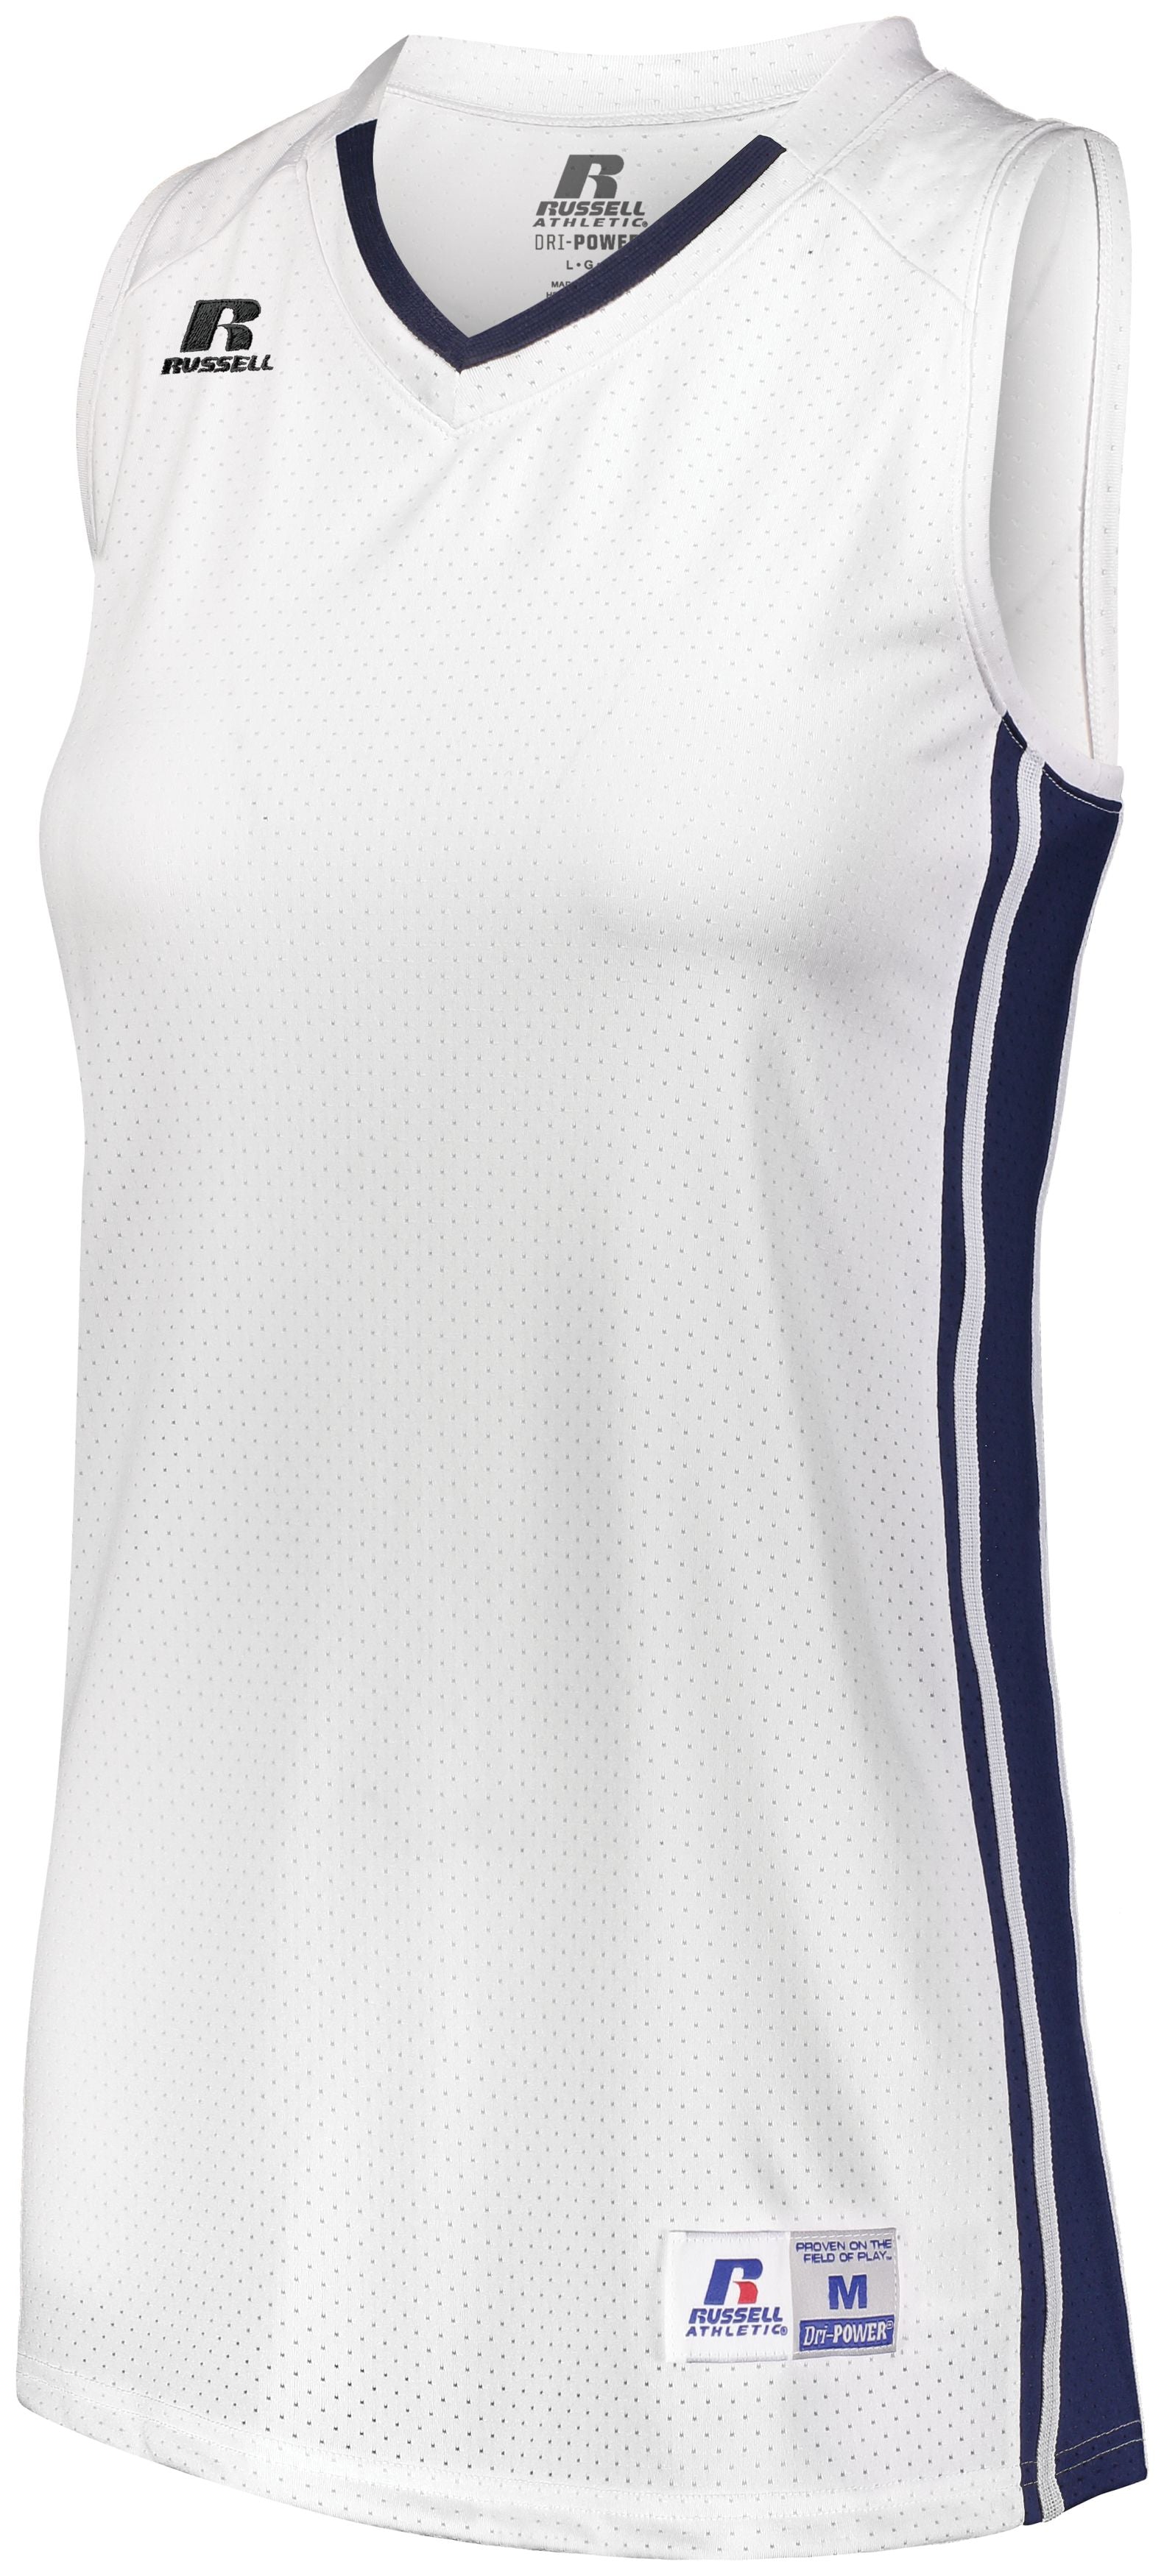 Russell Athletic Ladies Legacy Basketball Jersey in White/Navy  -Part of the Ladies, Ladies-Jersey, Basketball, Russell-Athletic-Products, Shirts, All-Sports, All-Sports-1 product lines at KanaleyCreations.com